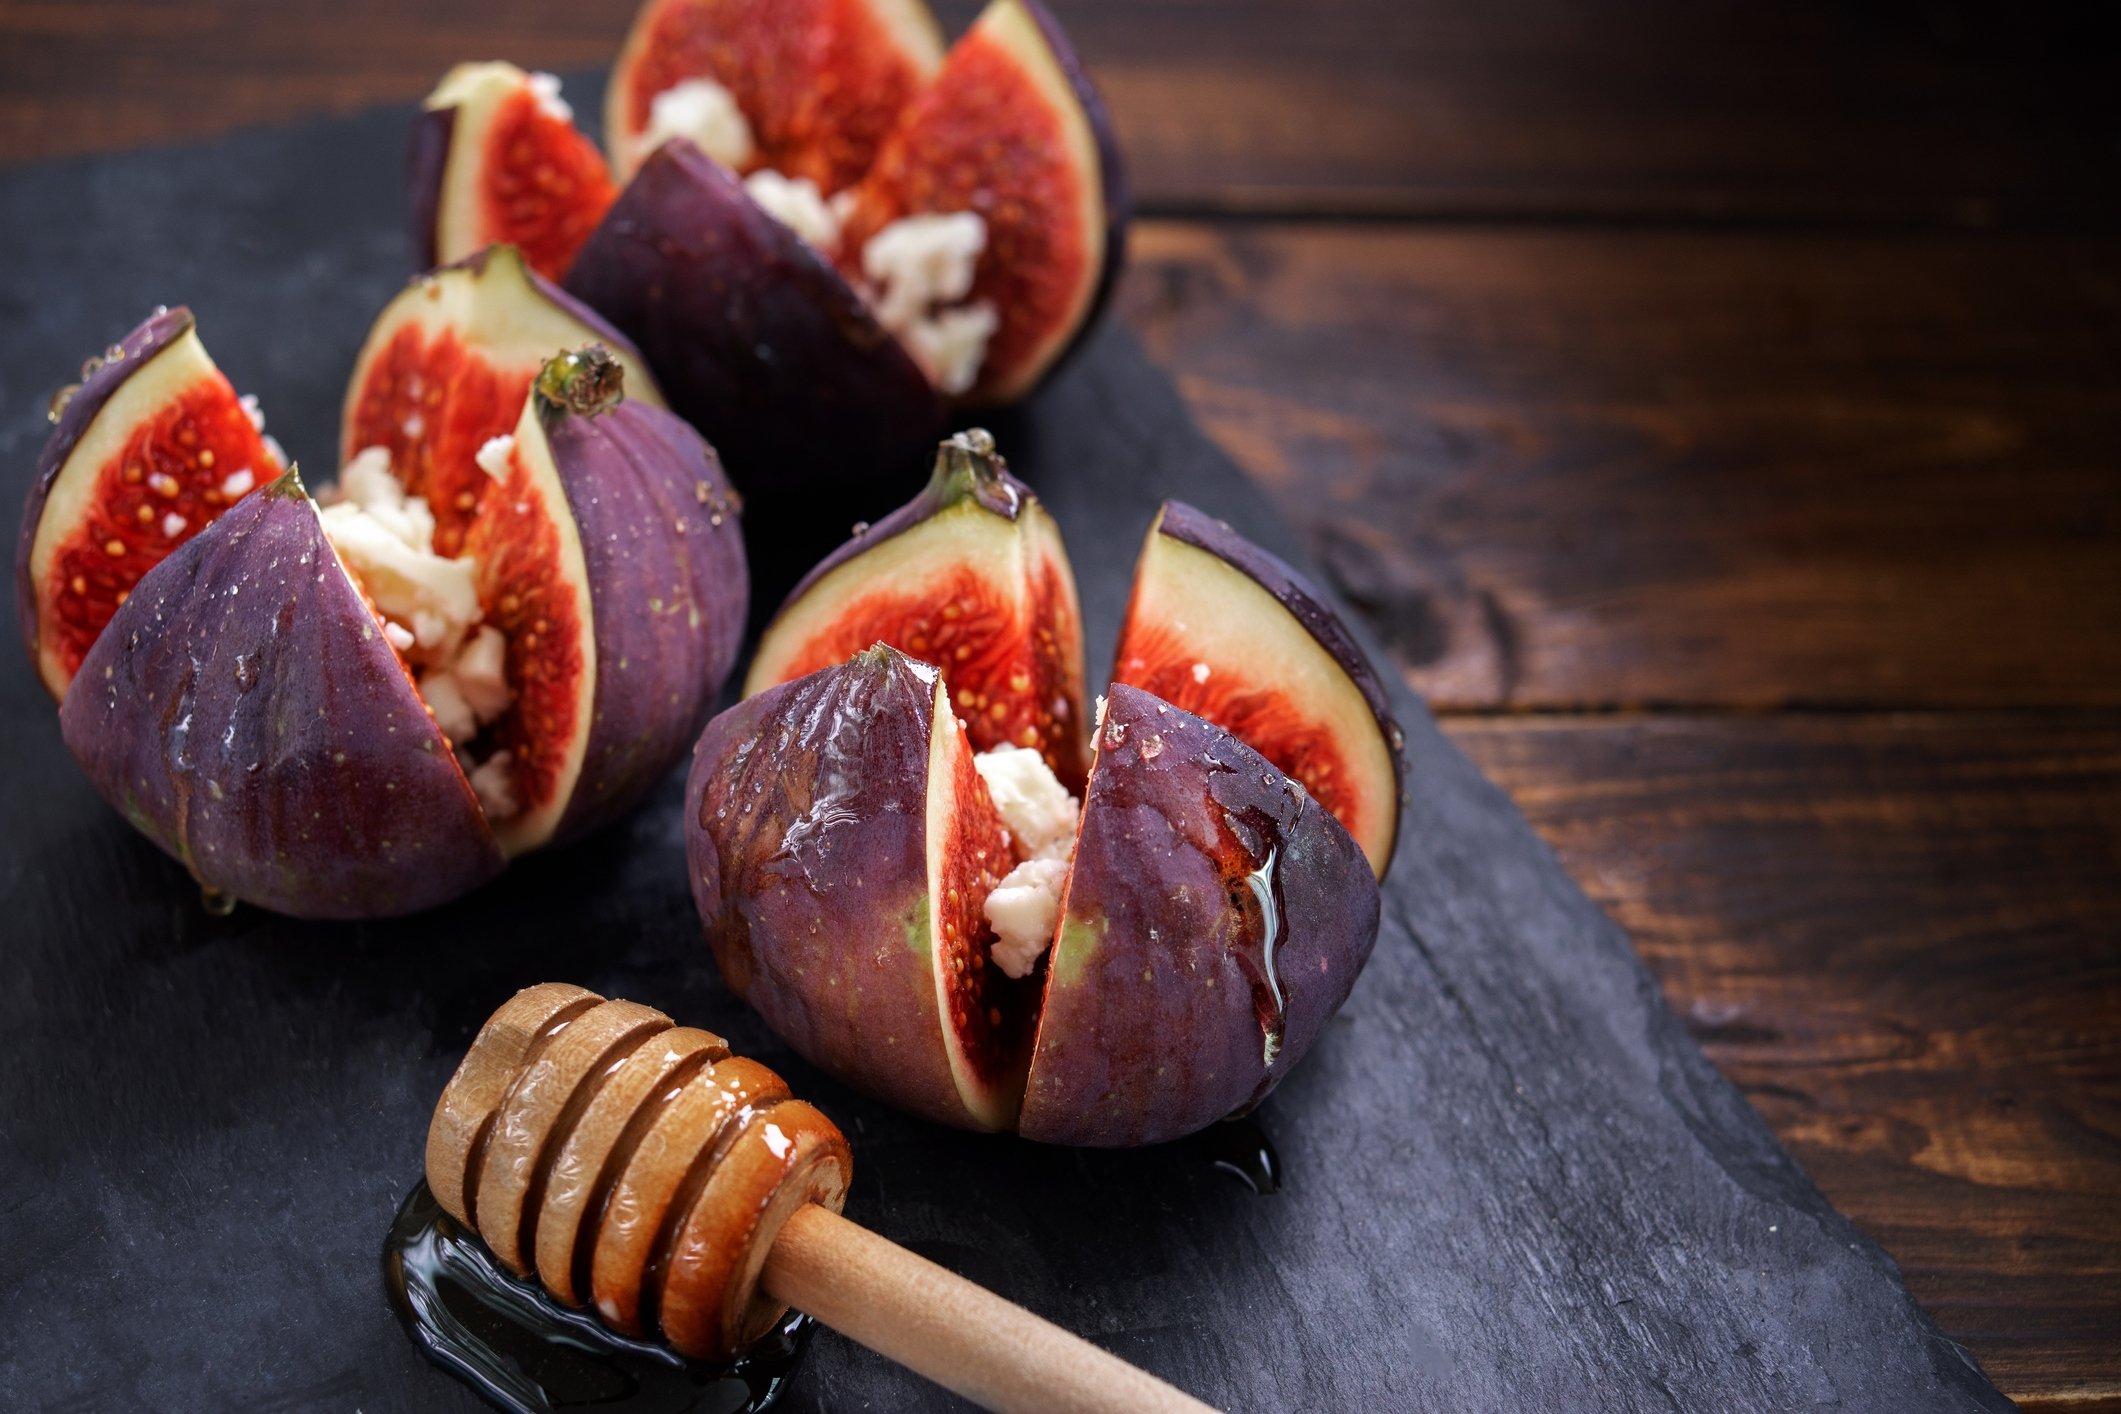 Stuff figs with crumbled feta and drizzle some honey on top for an indulgent snack. (iStock Photo)